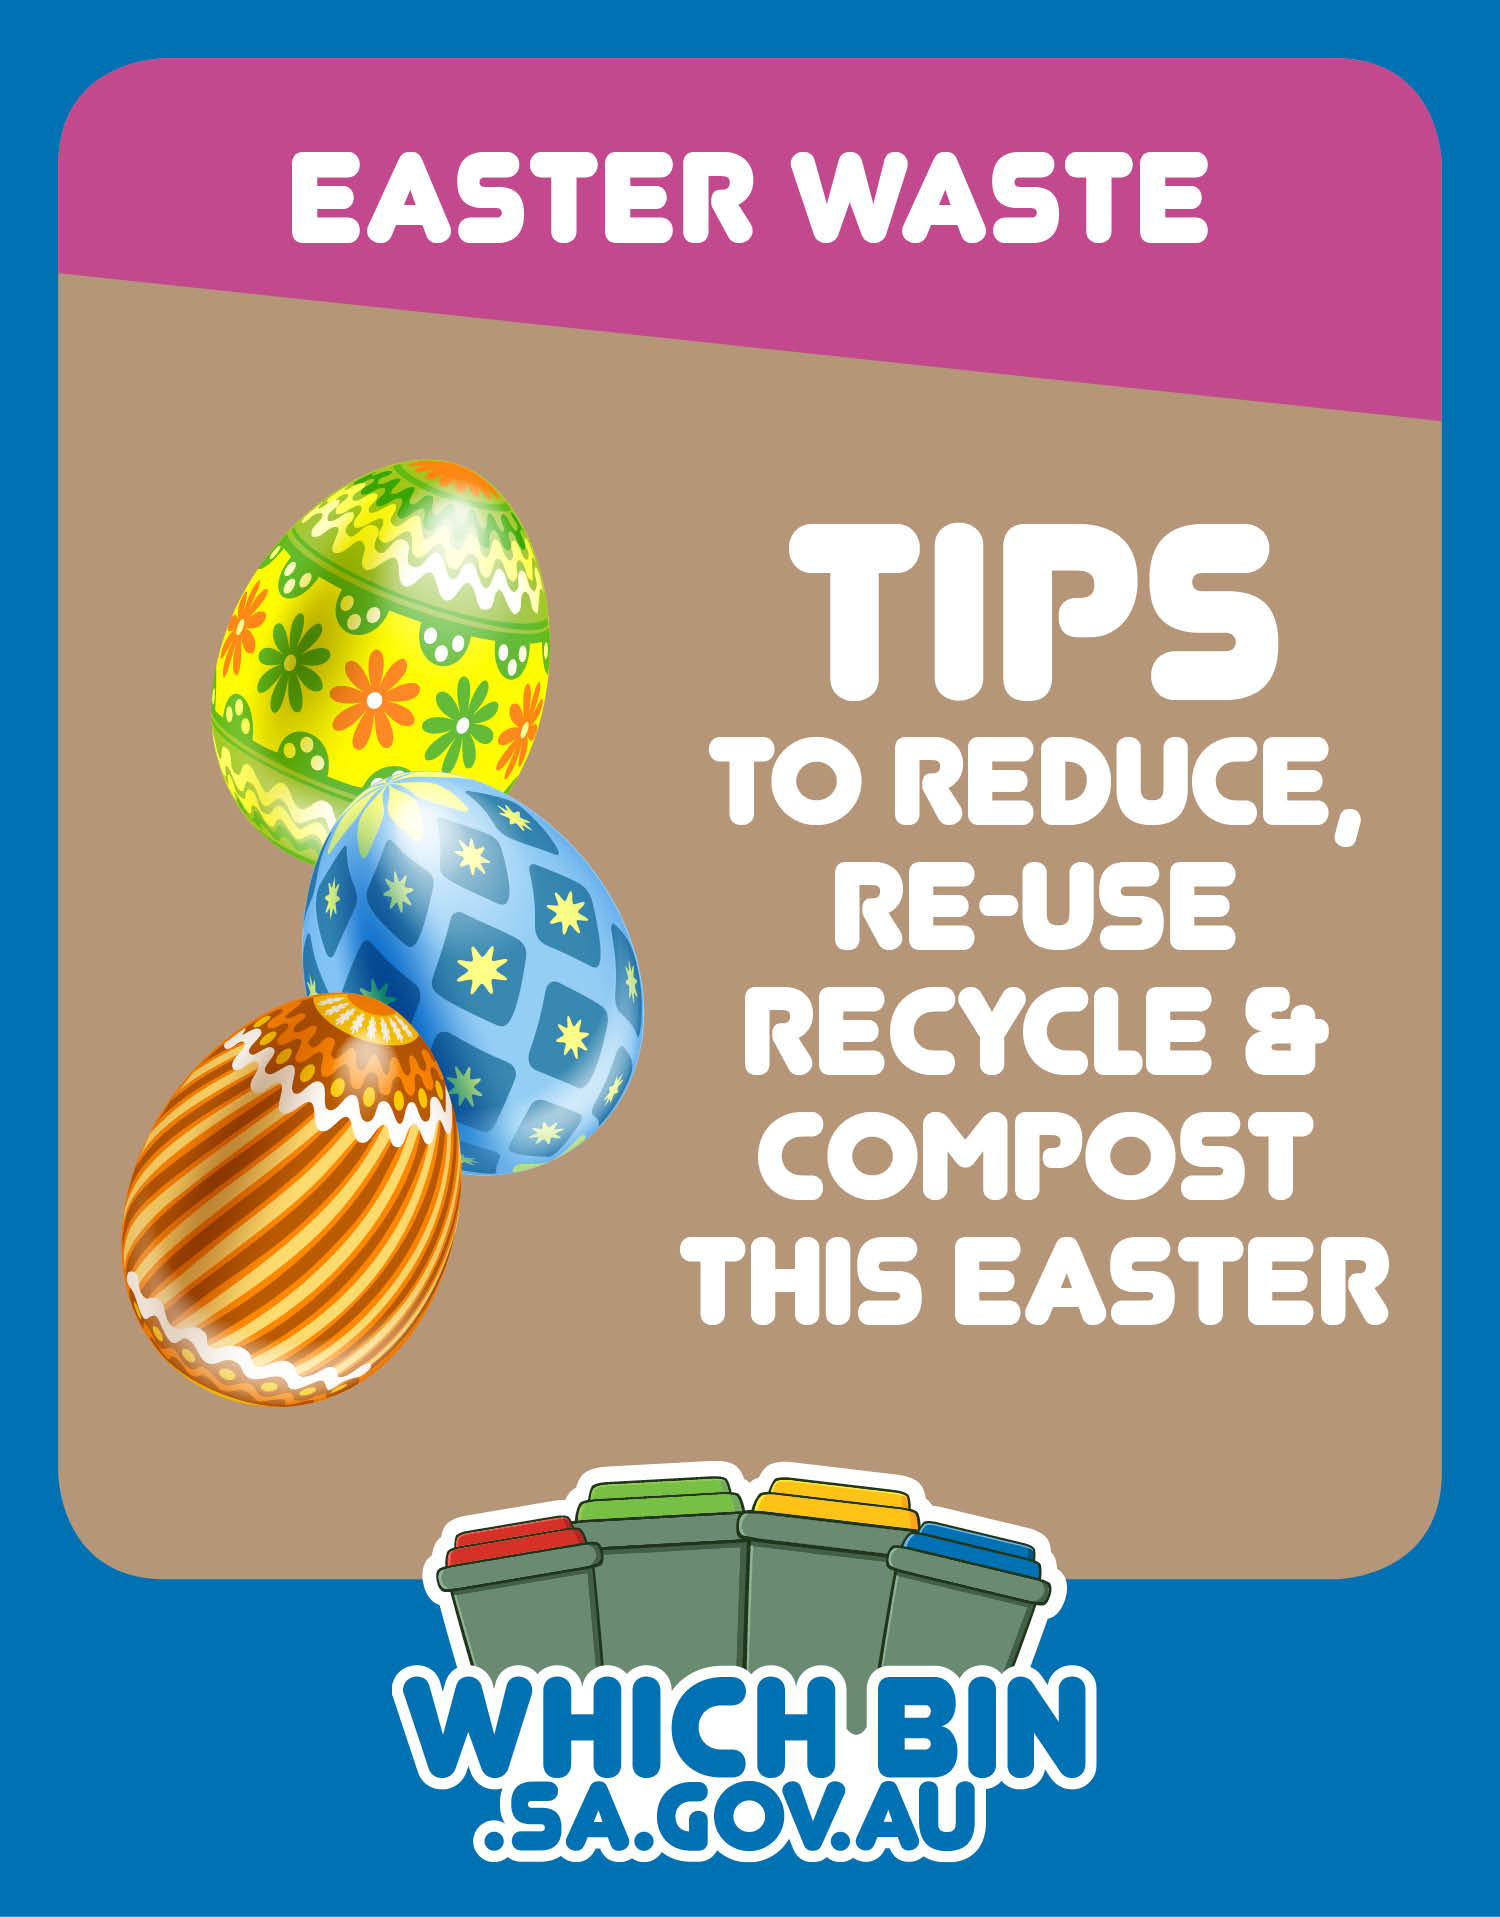 Why waste it? Eggsellent ways to avoid, reduce, reuse, recycle and compost waste this Easter!